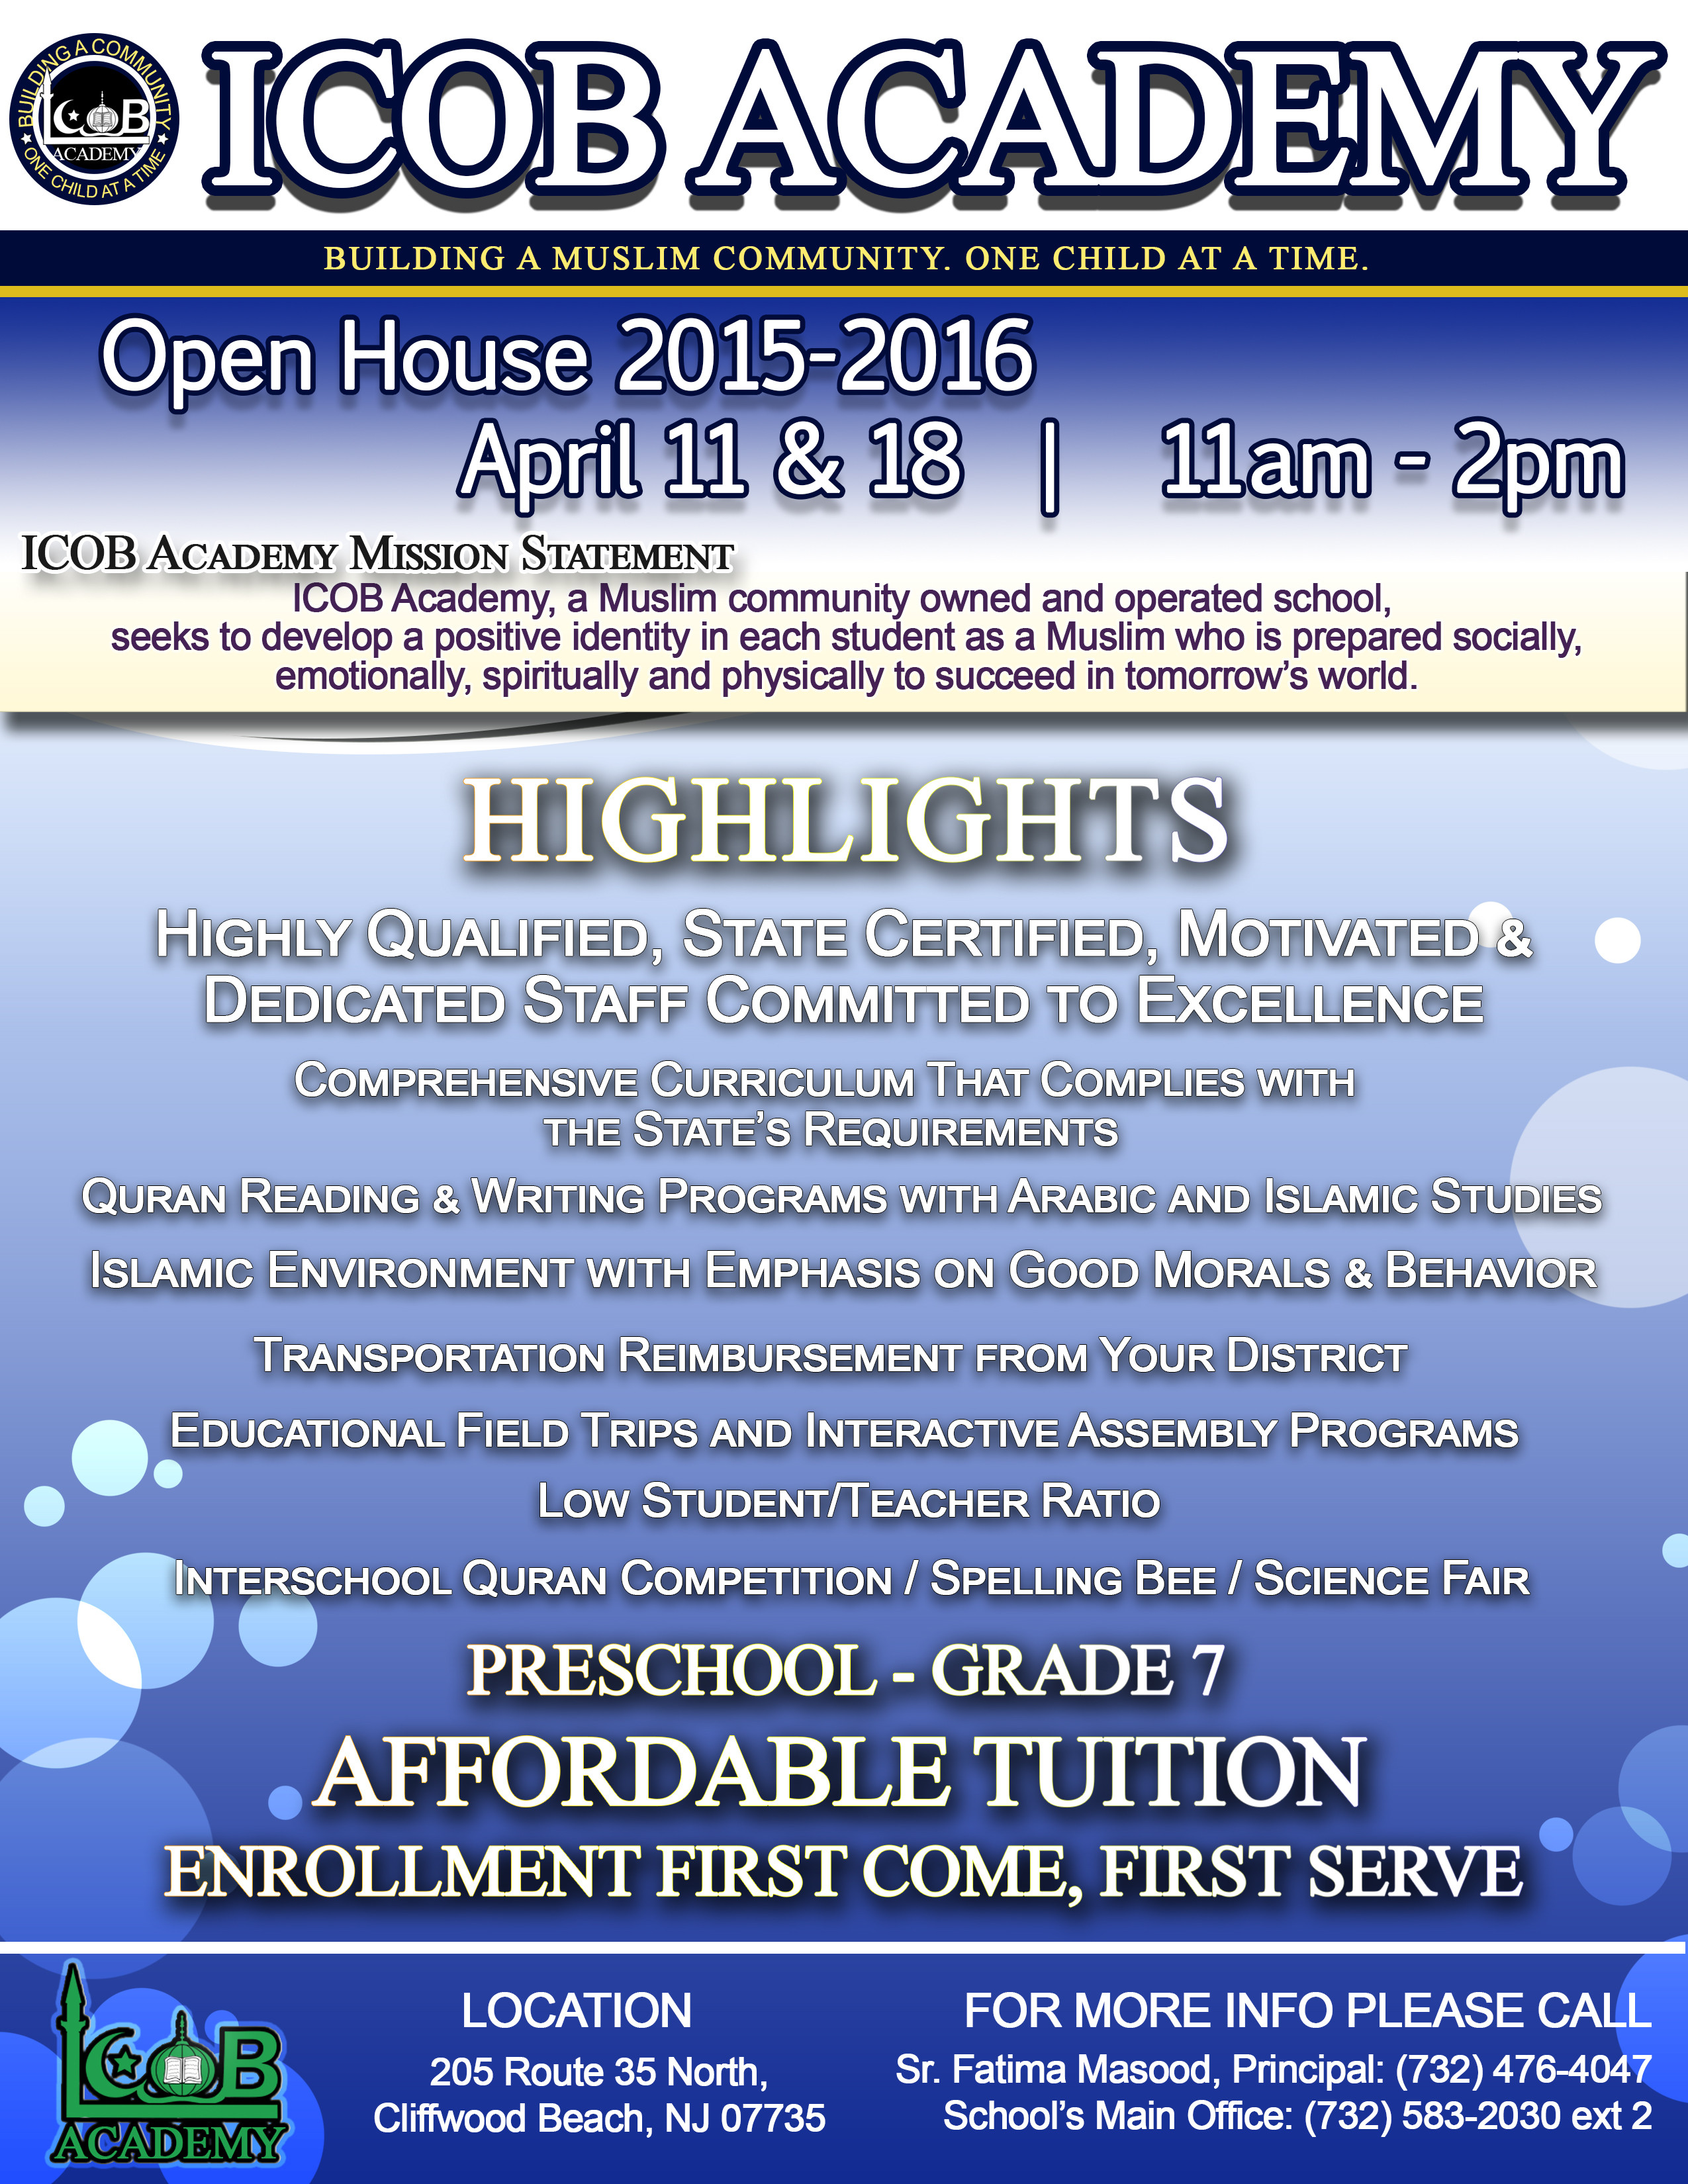 Open House Flyer
Made in Photoshop